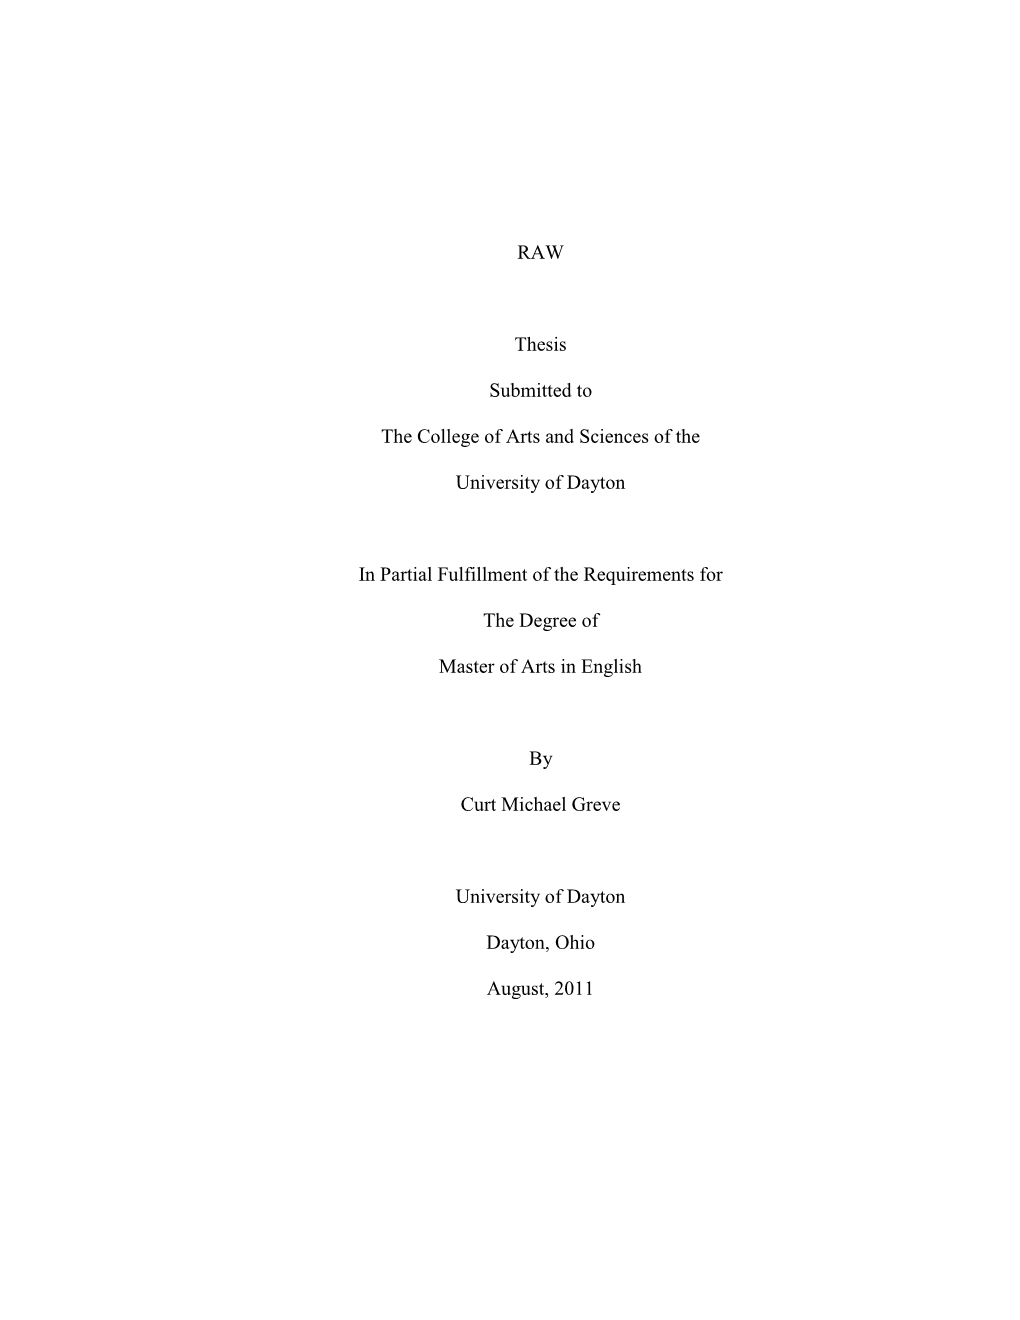 RAW Thesis Submitted to the College of Arts and Sciences of The